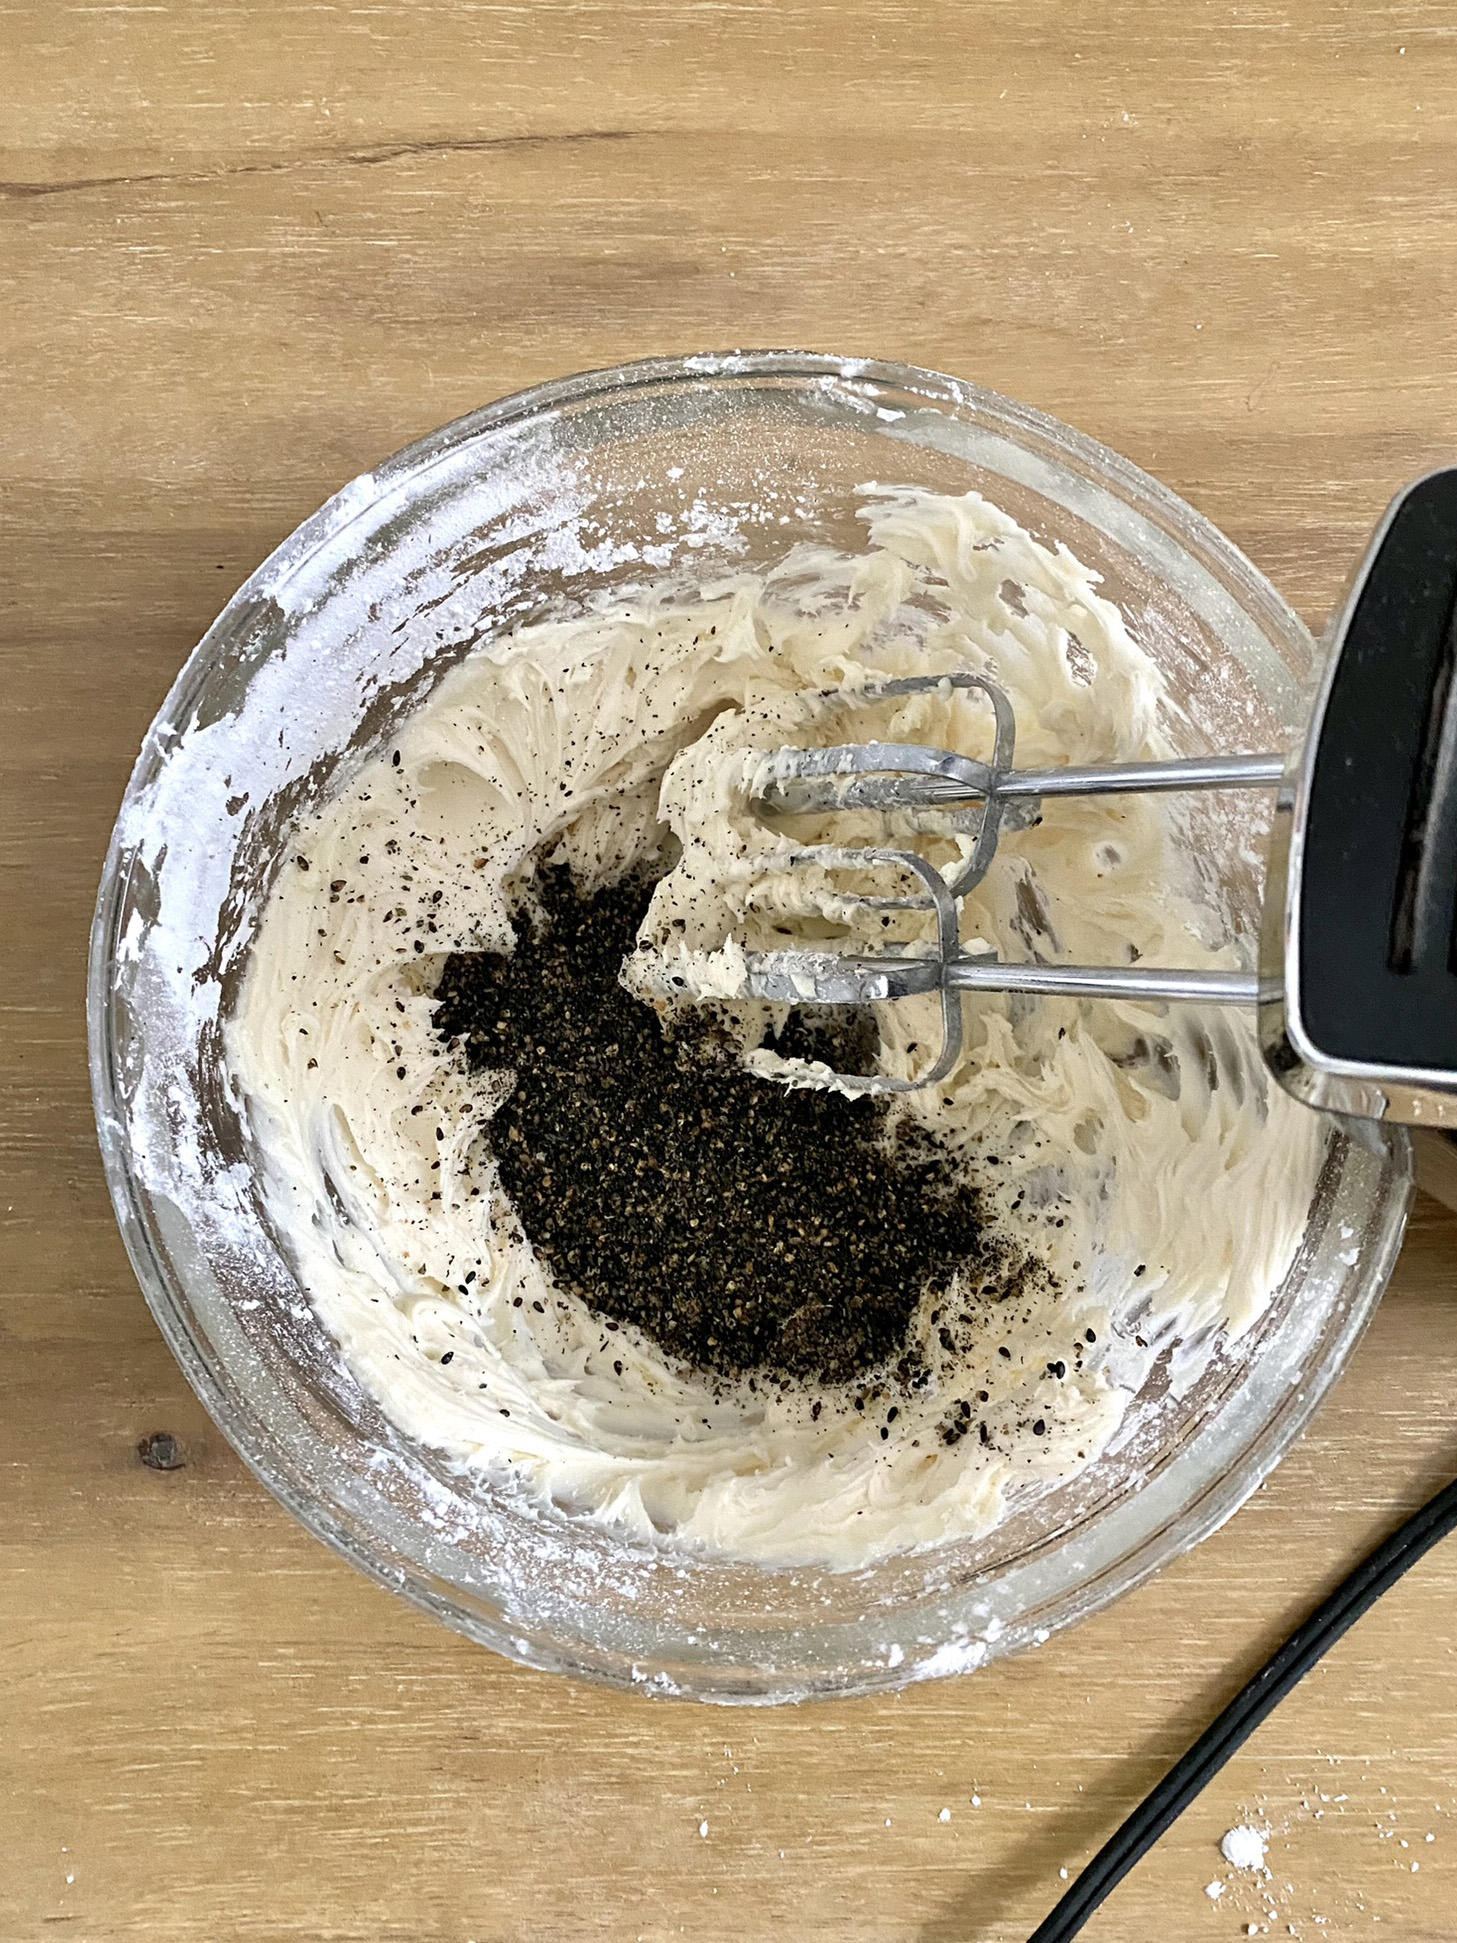 black sesame seeds being added to frosting in glass bowl with hand mixer to the side